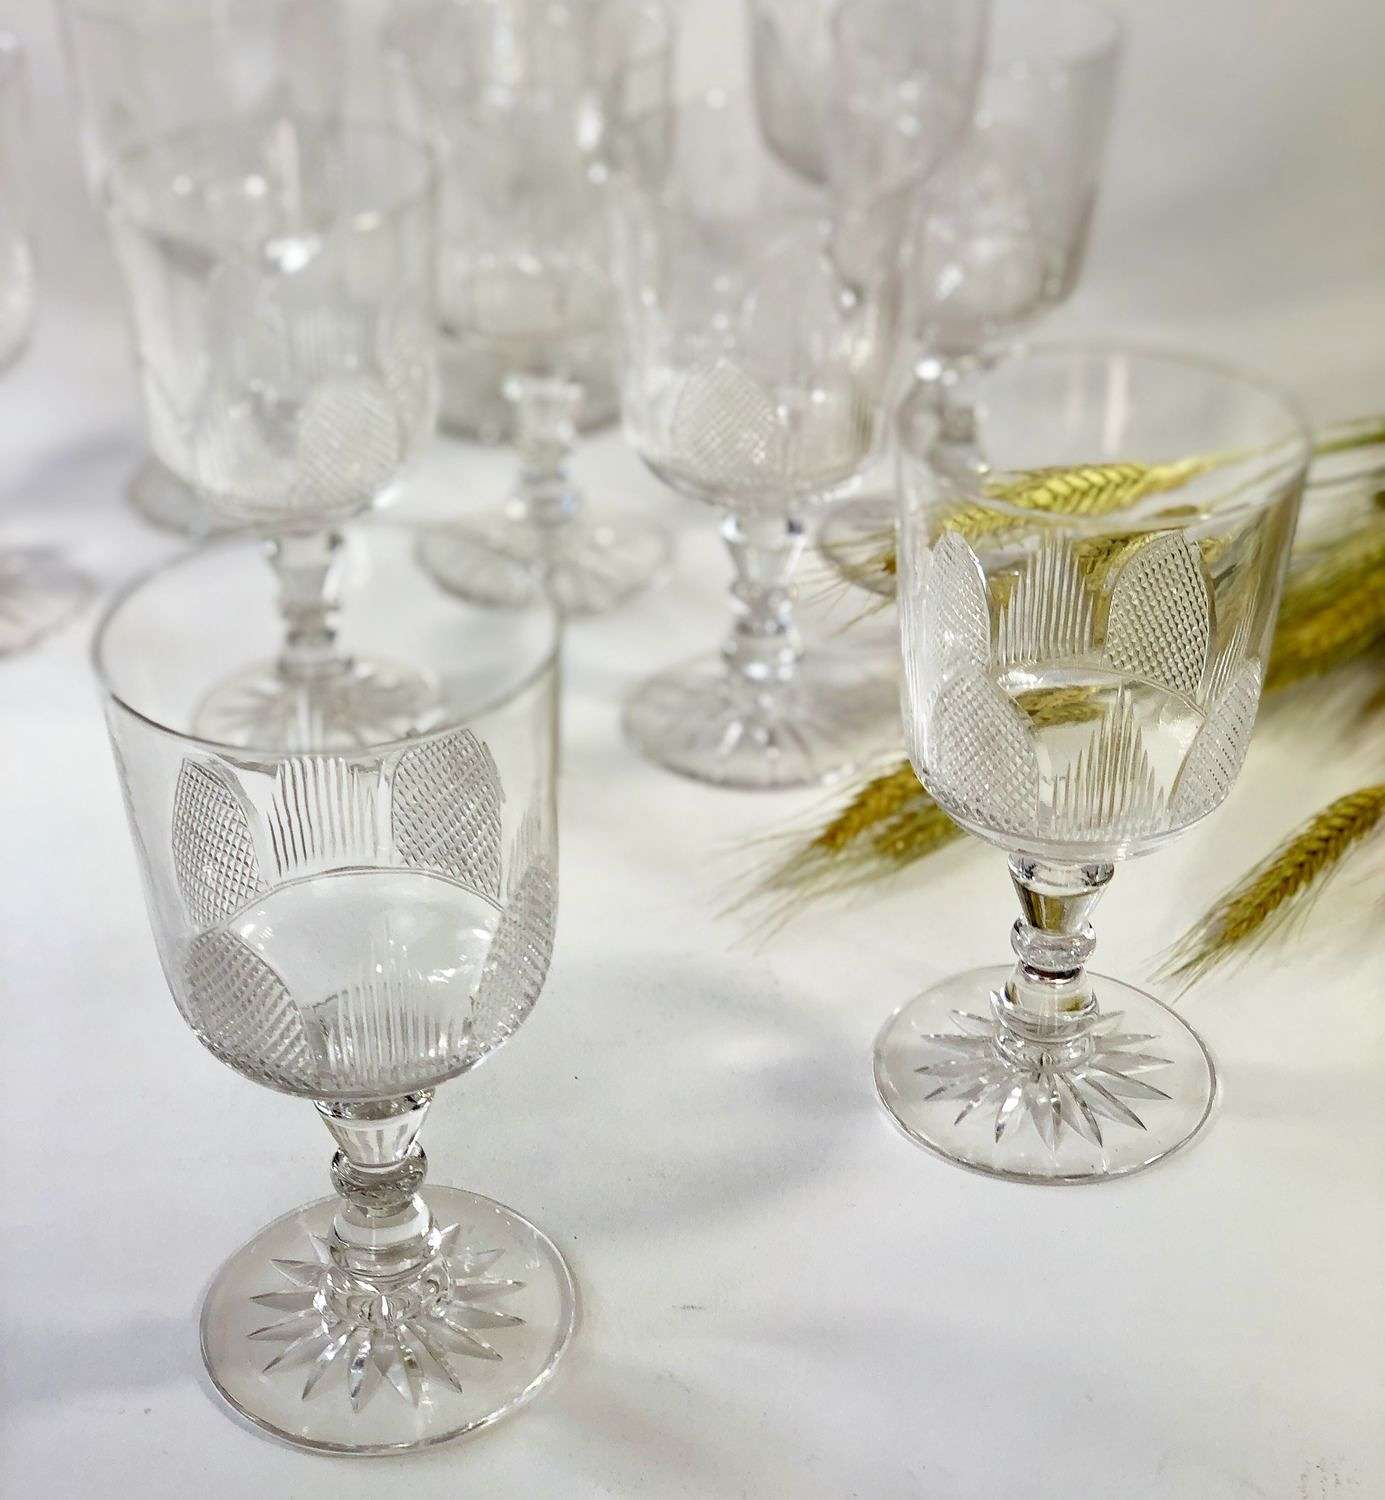 10 early 20th Century Baccarat crystal wine glasses